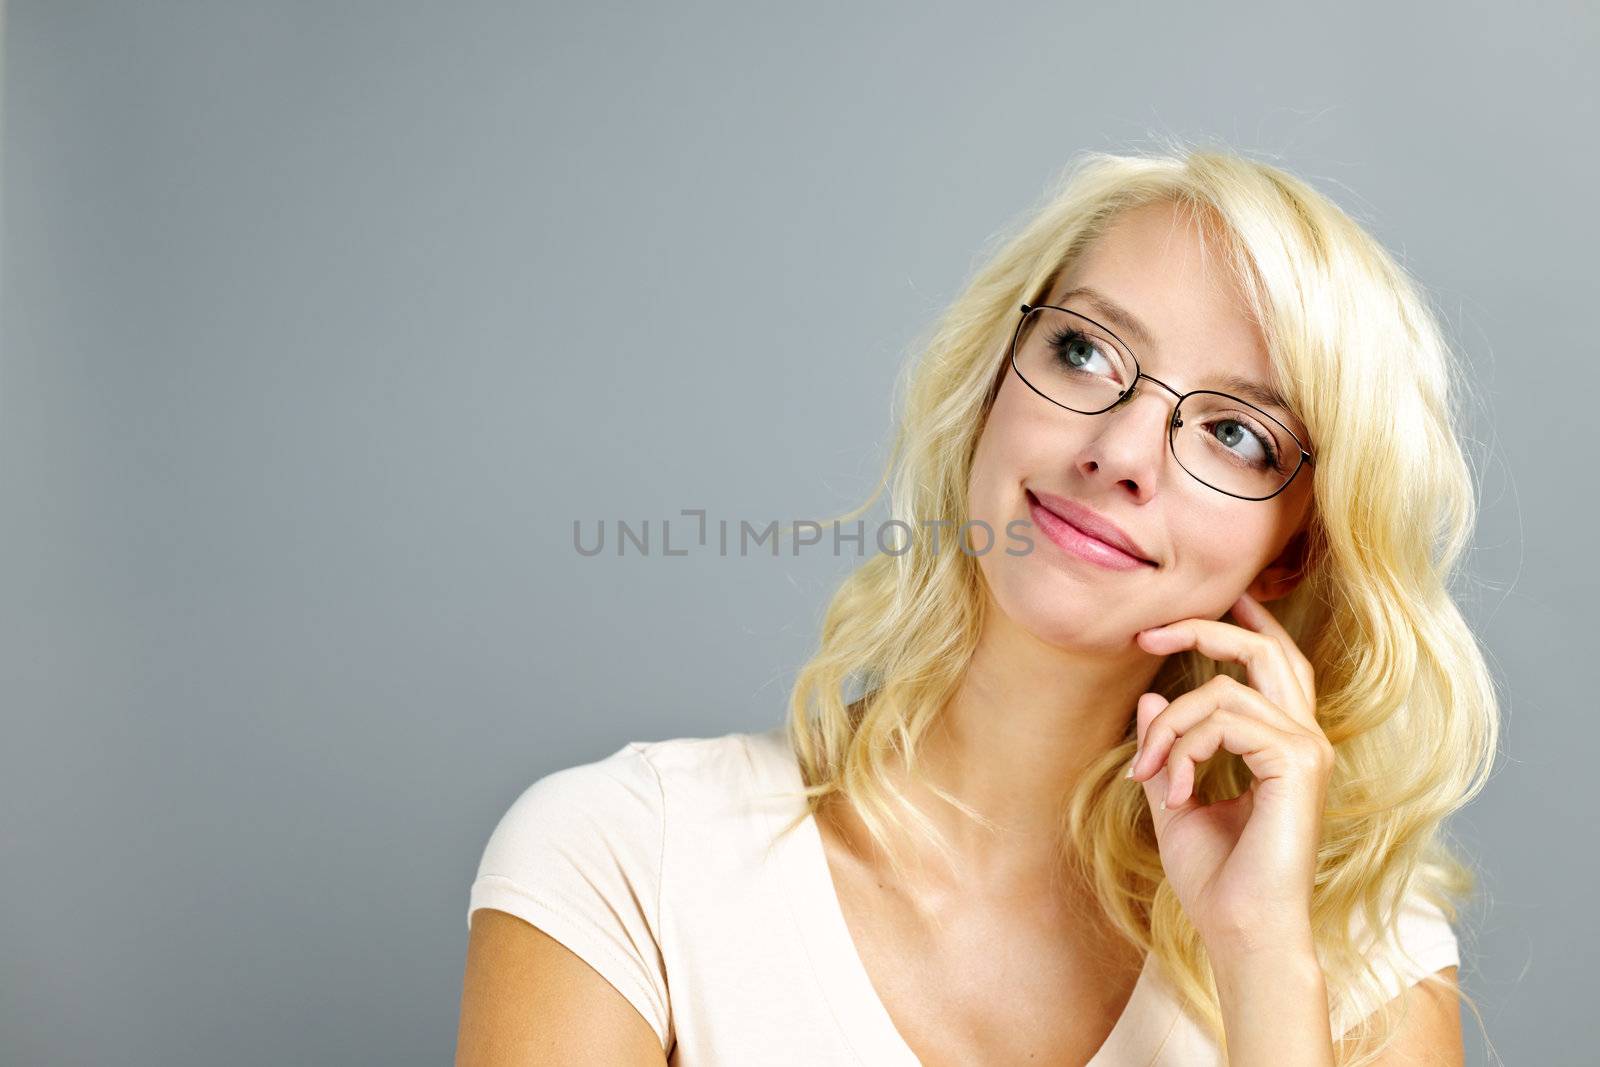 Thoughtful young woman wearing eyeglasses on grey background looking up